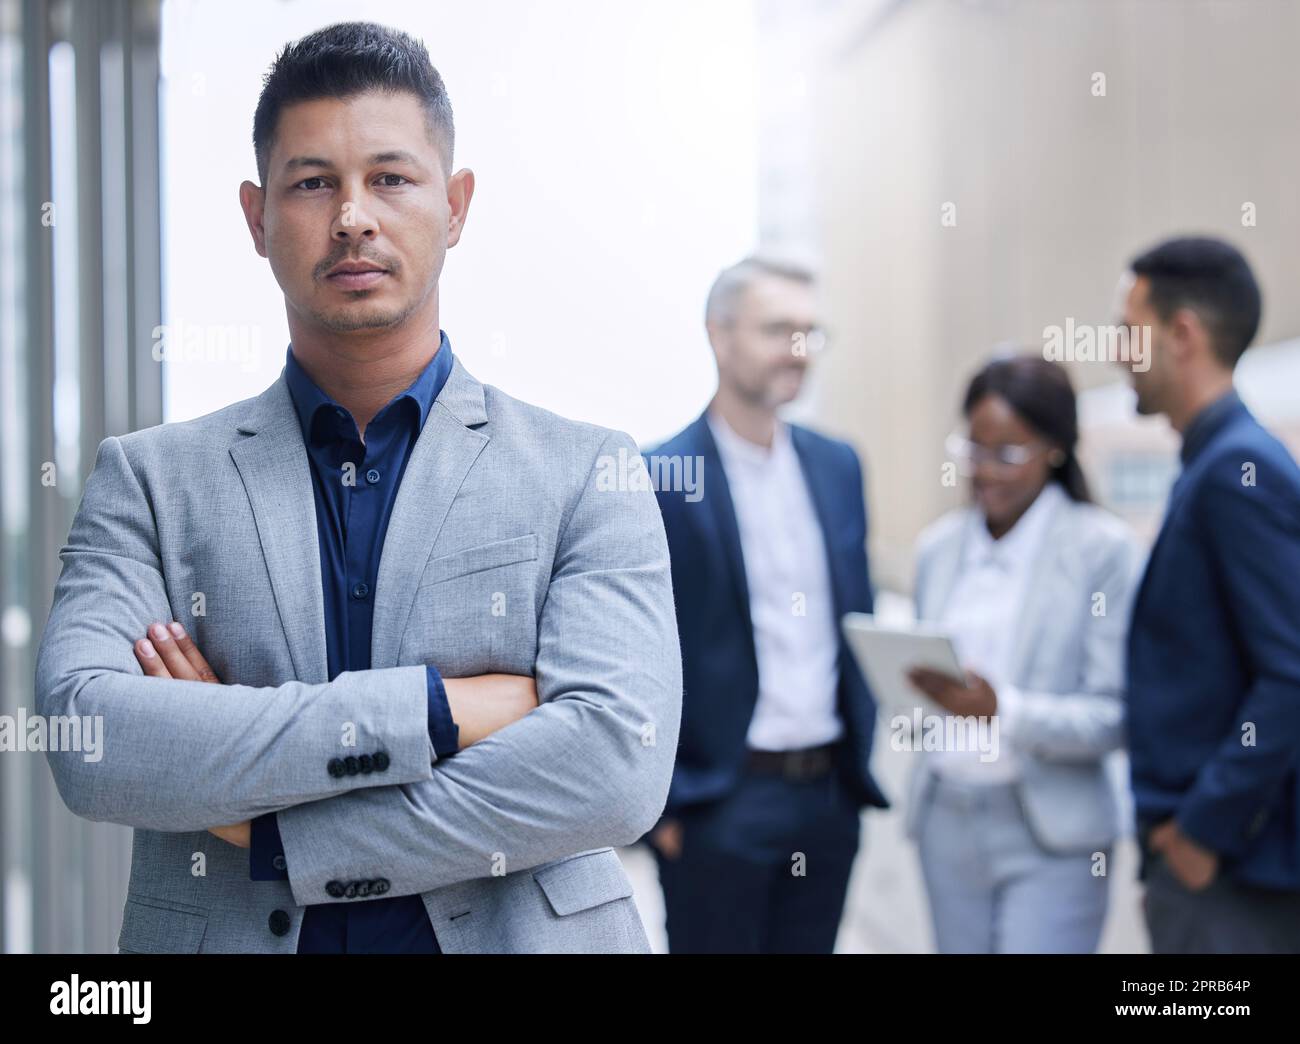 Face the day with confidence. Cropped portrait of a handsome mature businessman standing outside with his arms folded with his colleagues in the background. Stock Photo